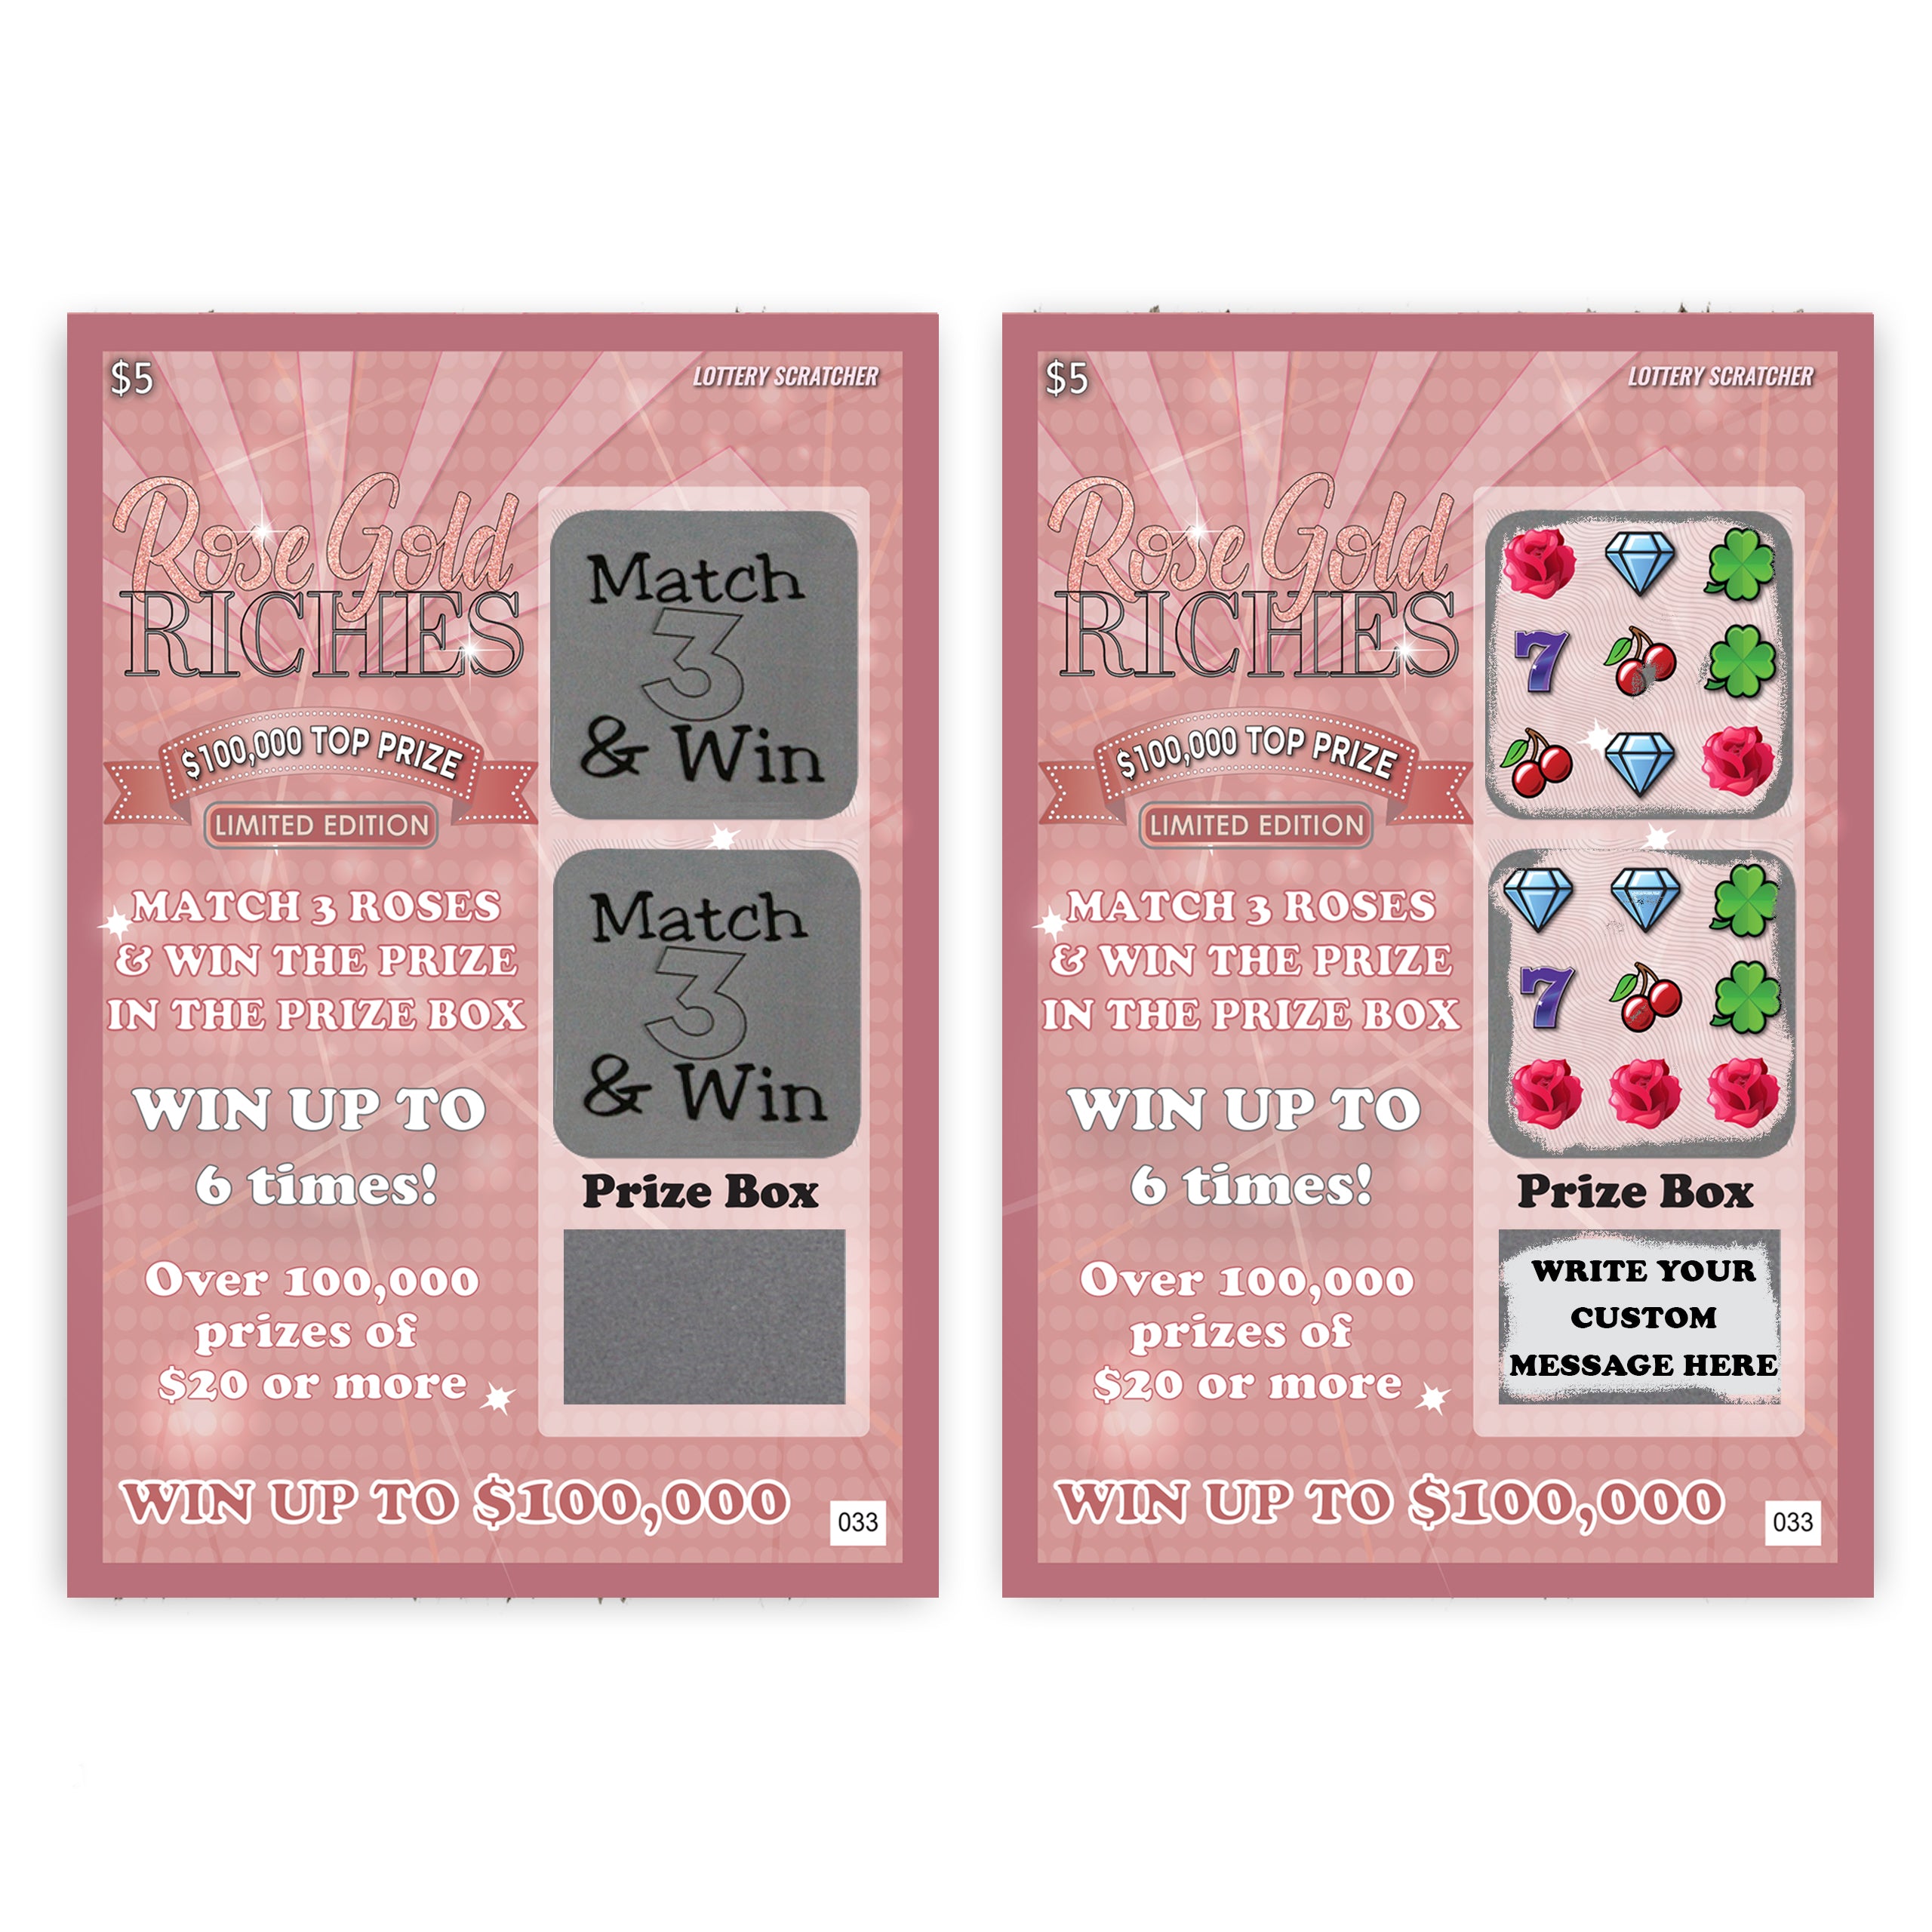 CUSTOM Holiday Valentine's Day/Prom Rose Gold Riches Lotto Replica Scratch Off Card 4" x 6" - My Scratch Offs